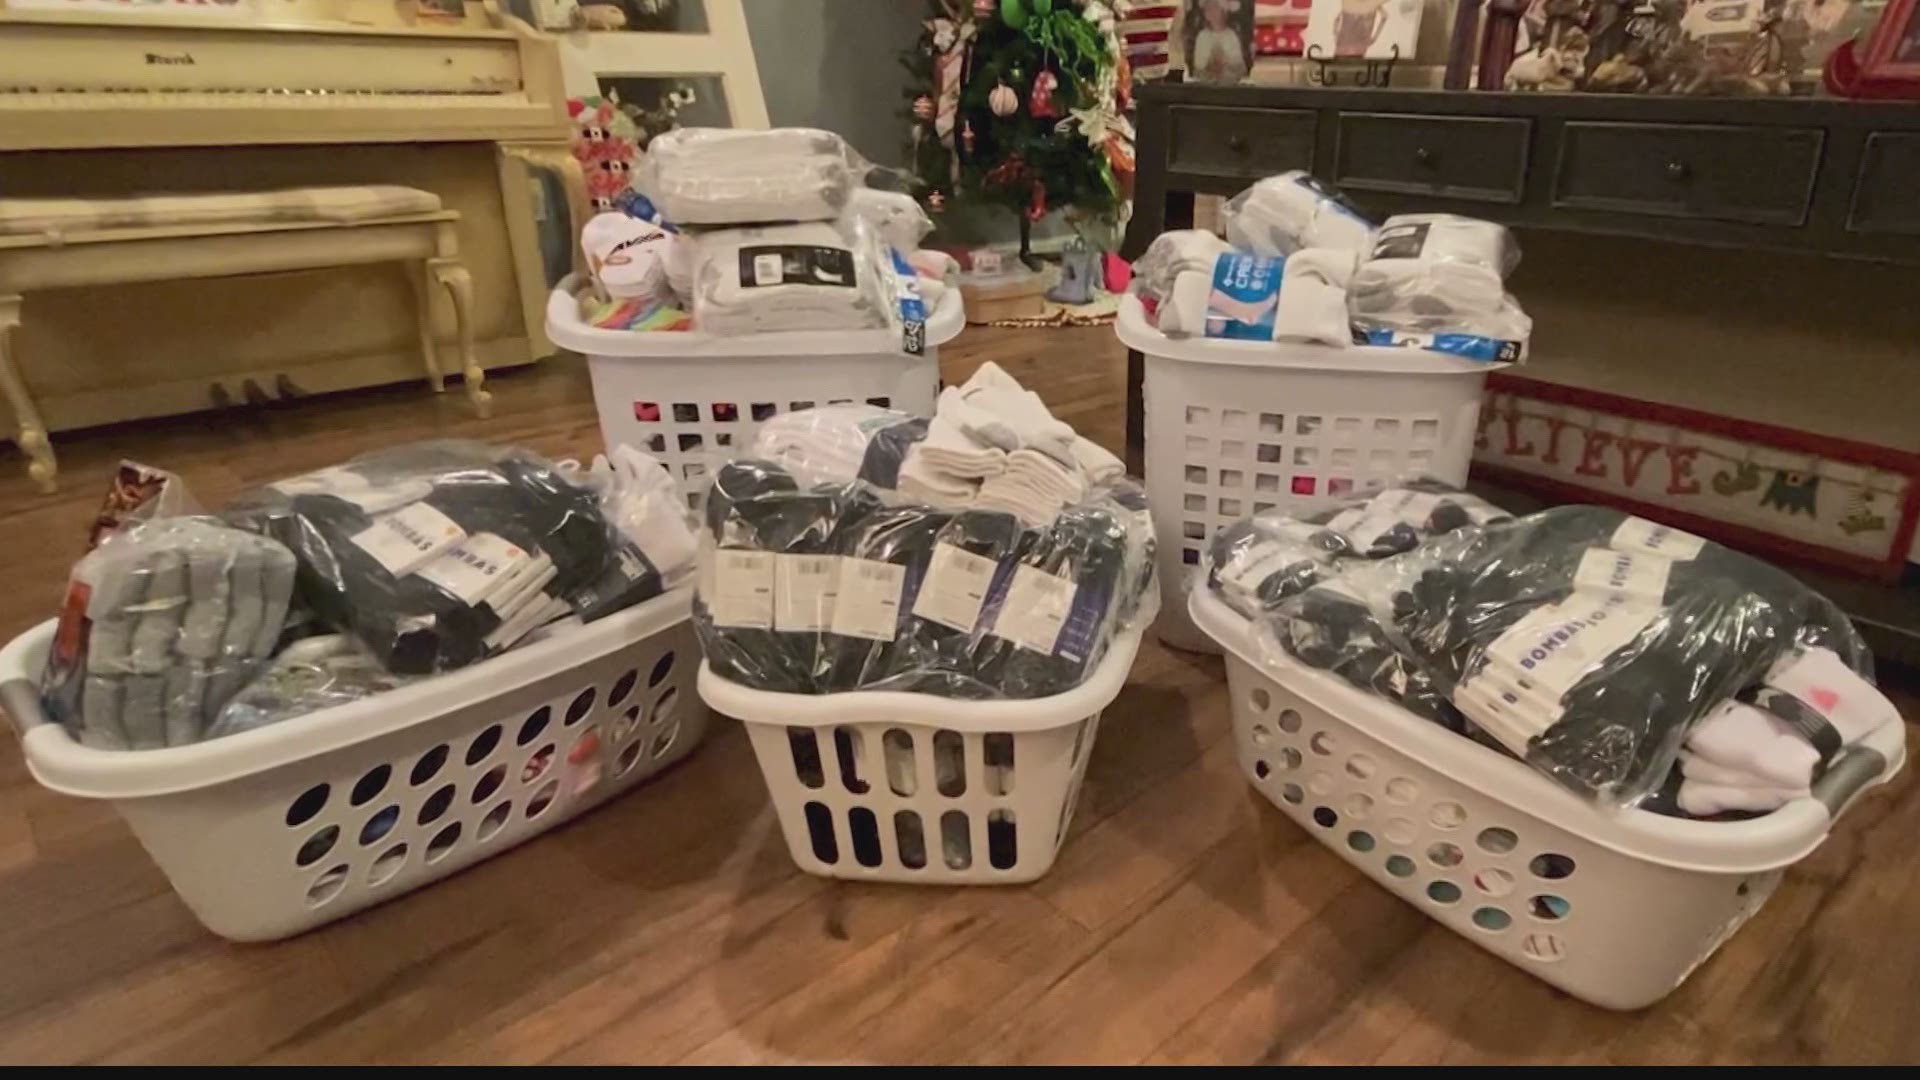 The girl's mom asked her friends and families for socks she could donate.